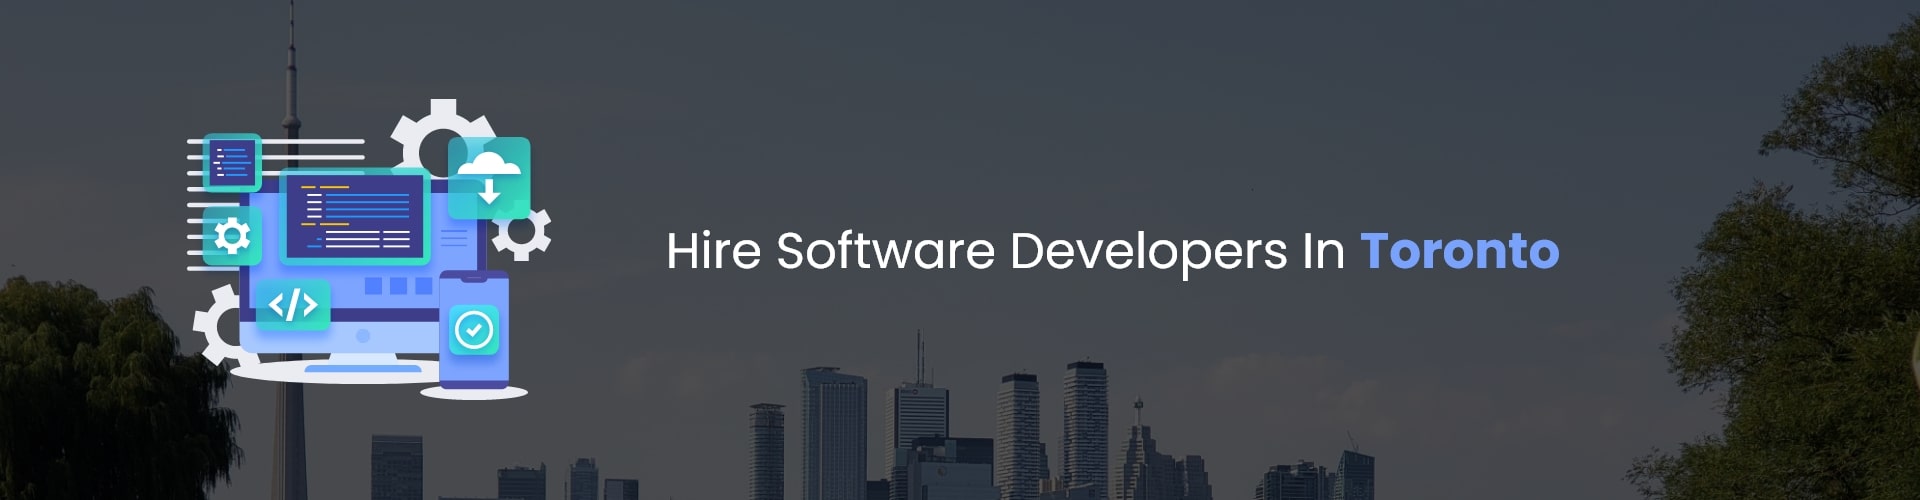 hire software developers in toronto